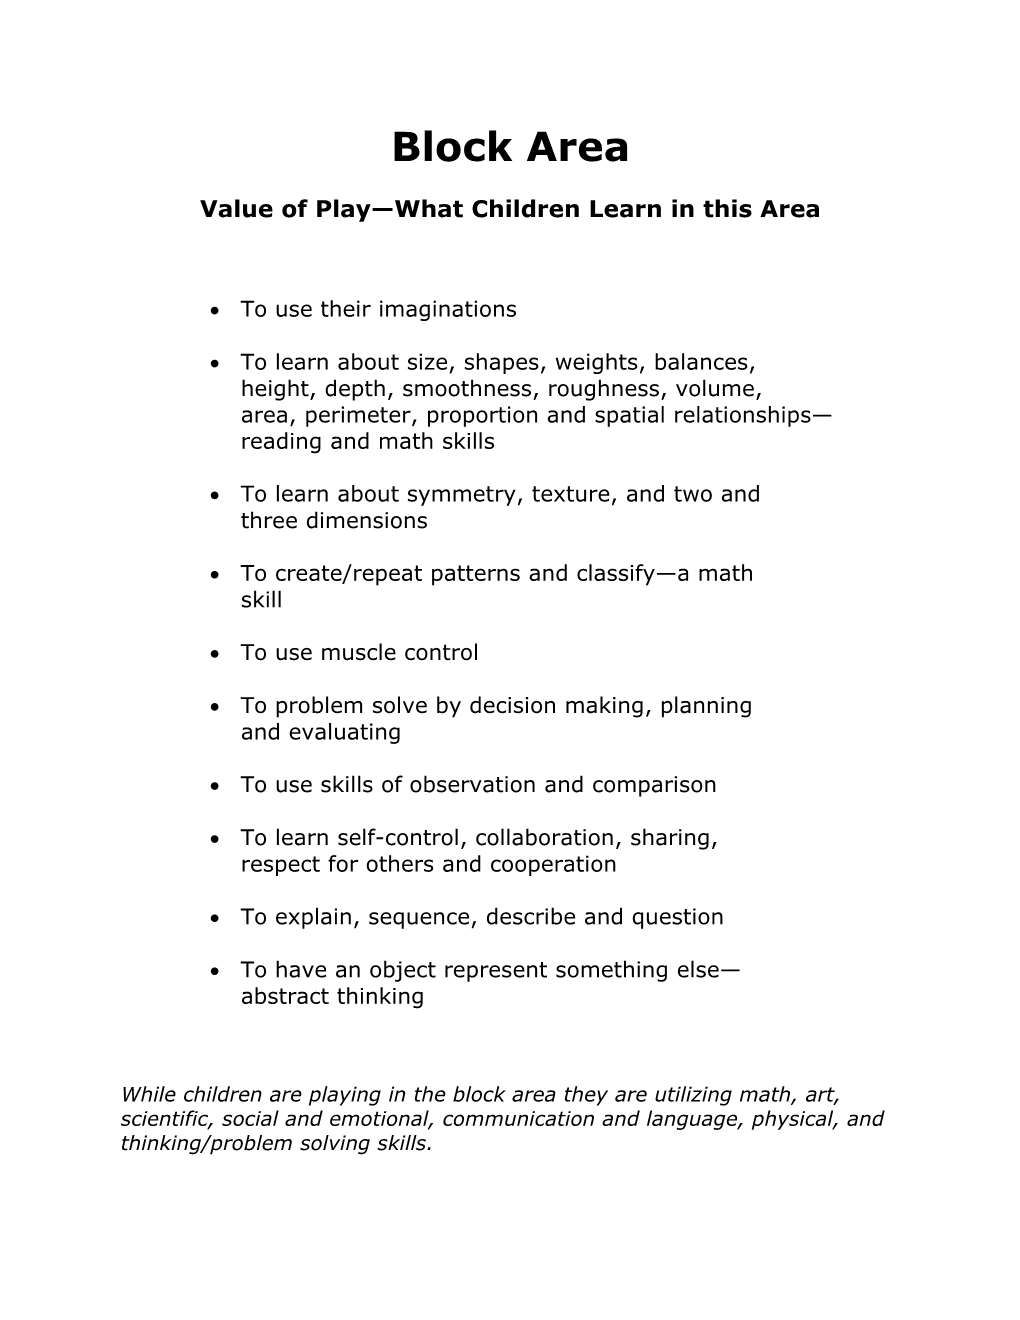 Block Building: Opportunities for Learning